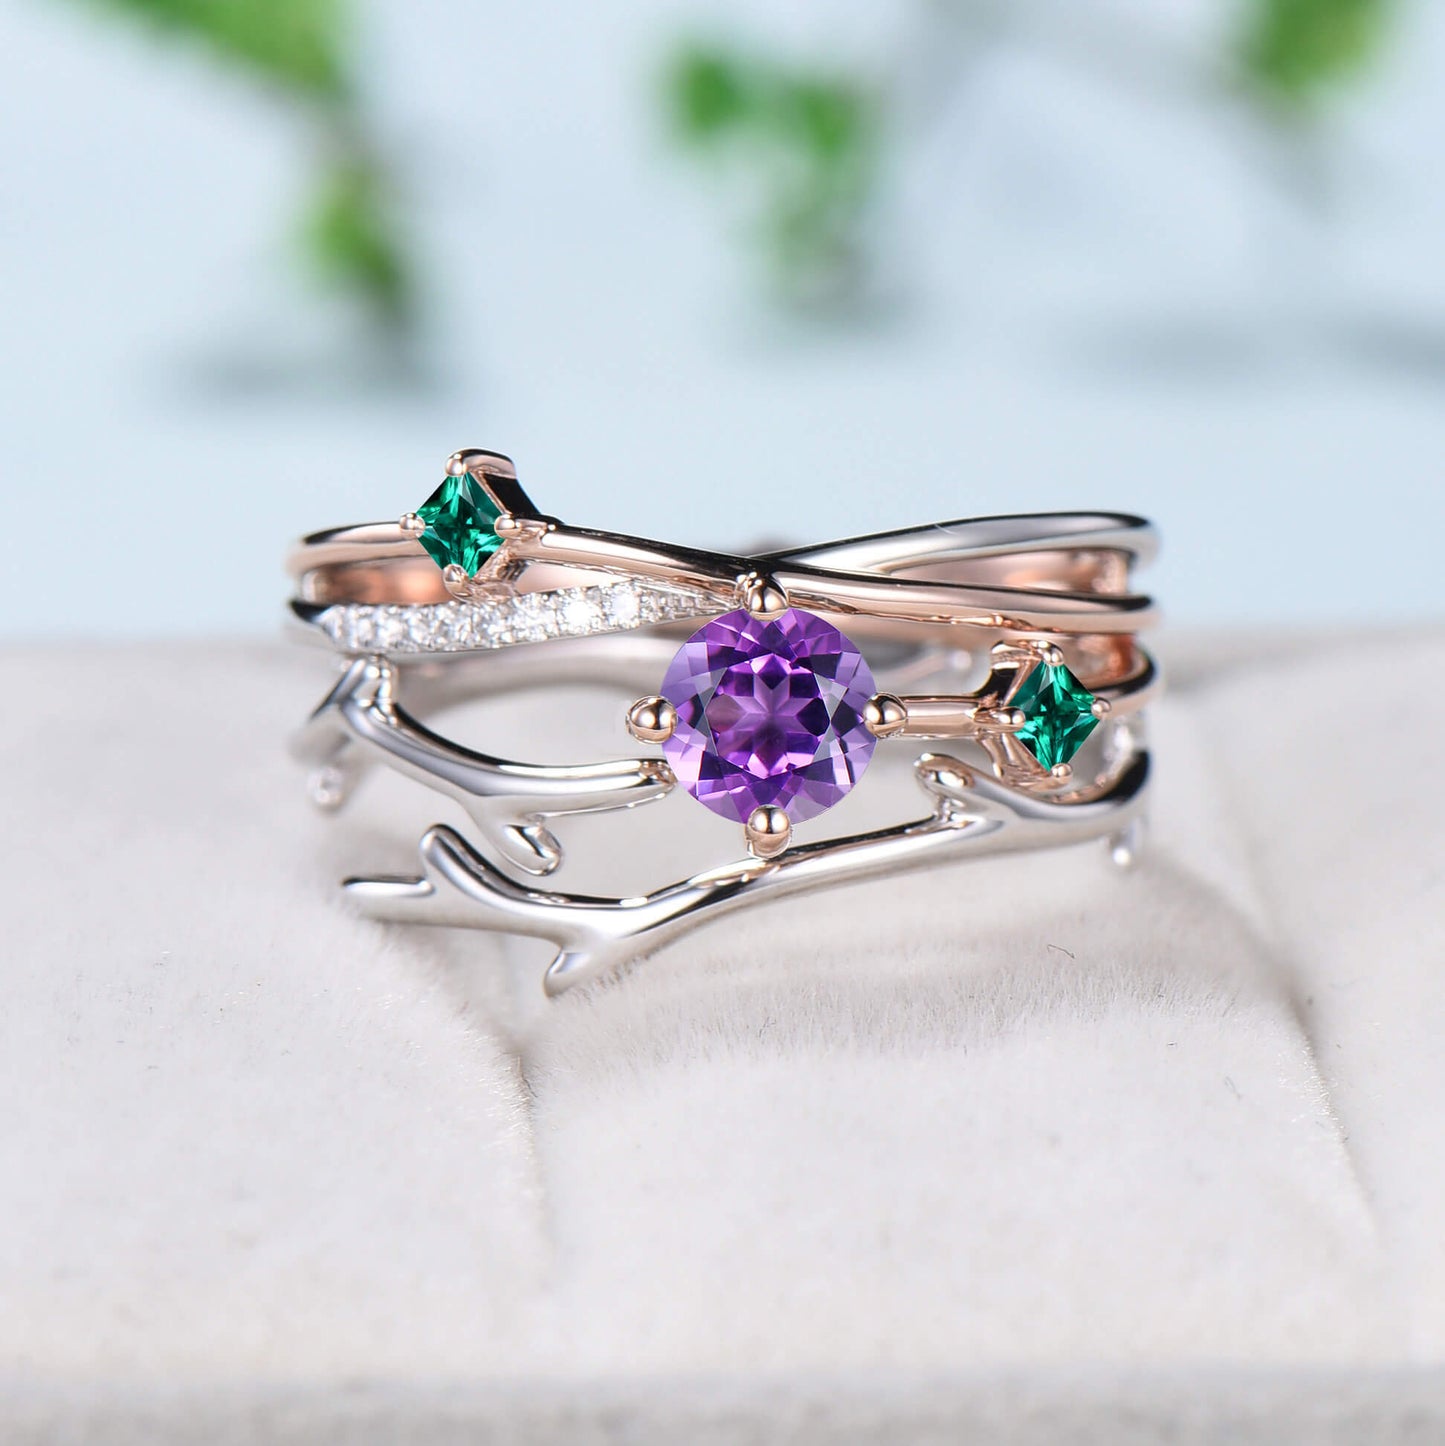 Two-tone gold Twig amethyst engagement ring set dainty Leaf green emerald branch wedding set women Unique natural inspired anniversary gift - PENFINE